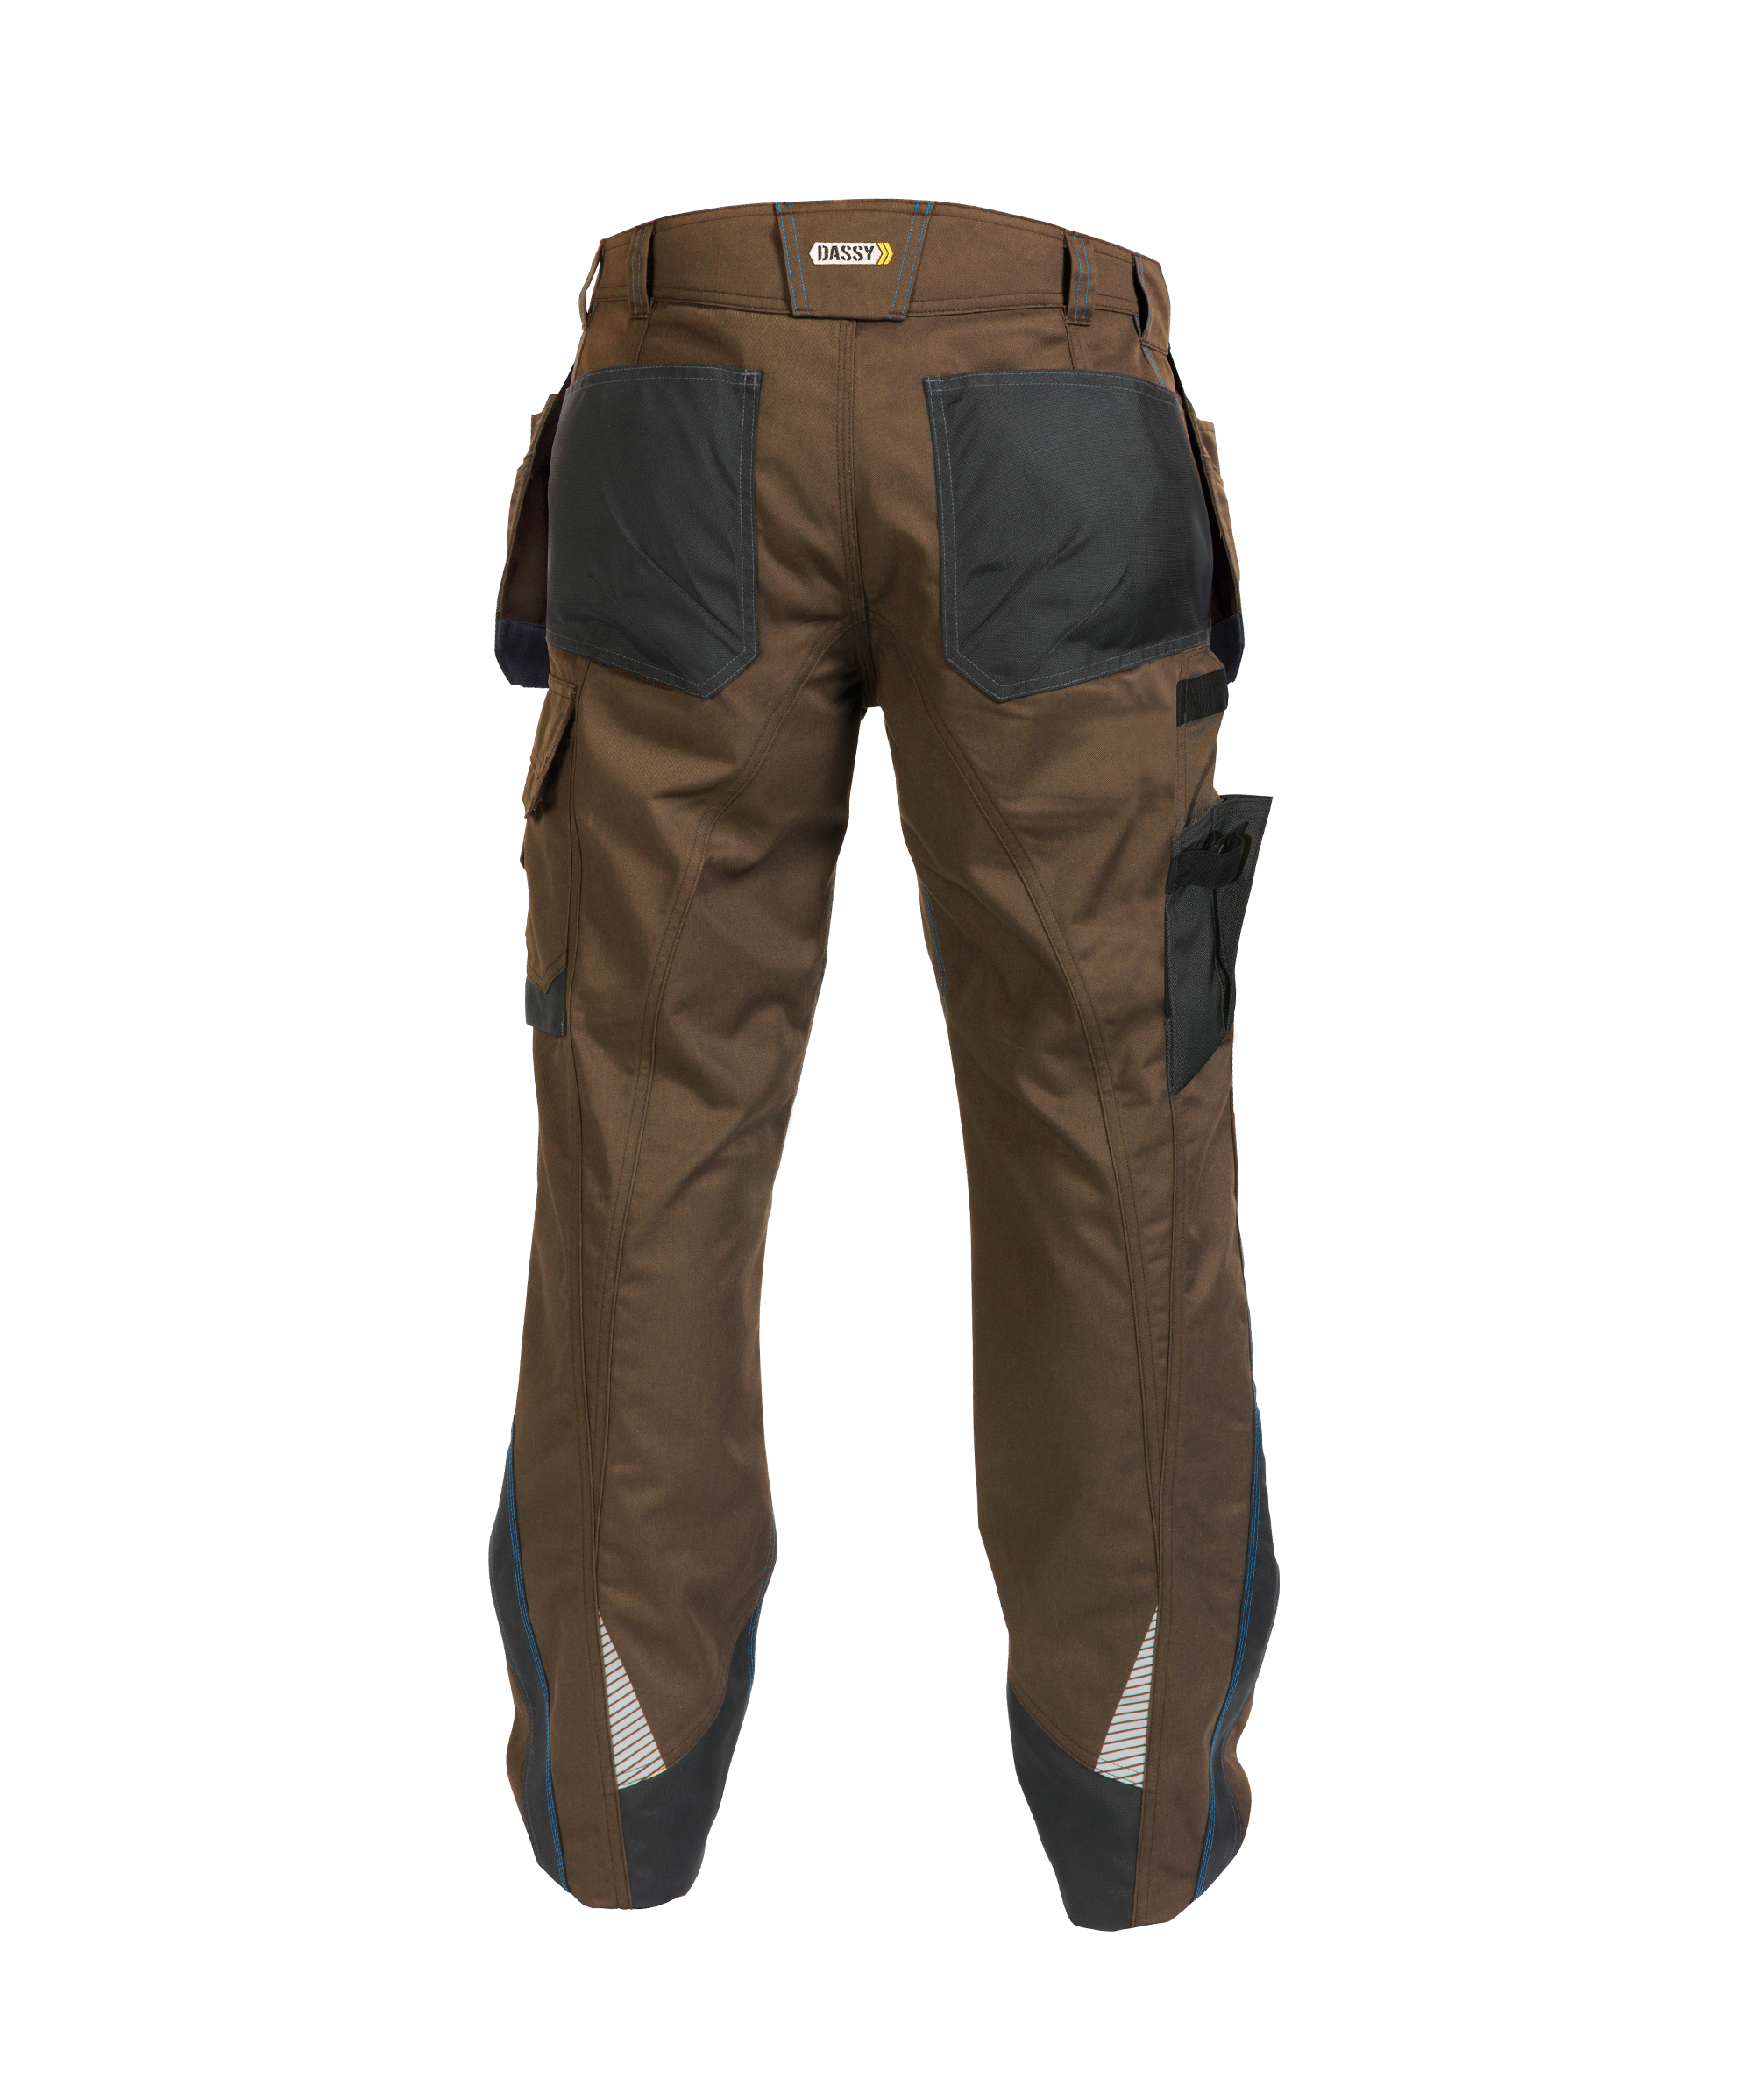 magnetic_two-tone-work-trousers-with-multi-pockets-and-knee-pockets_clay-brown-anthracite-grey_back.jpg